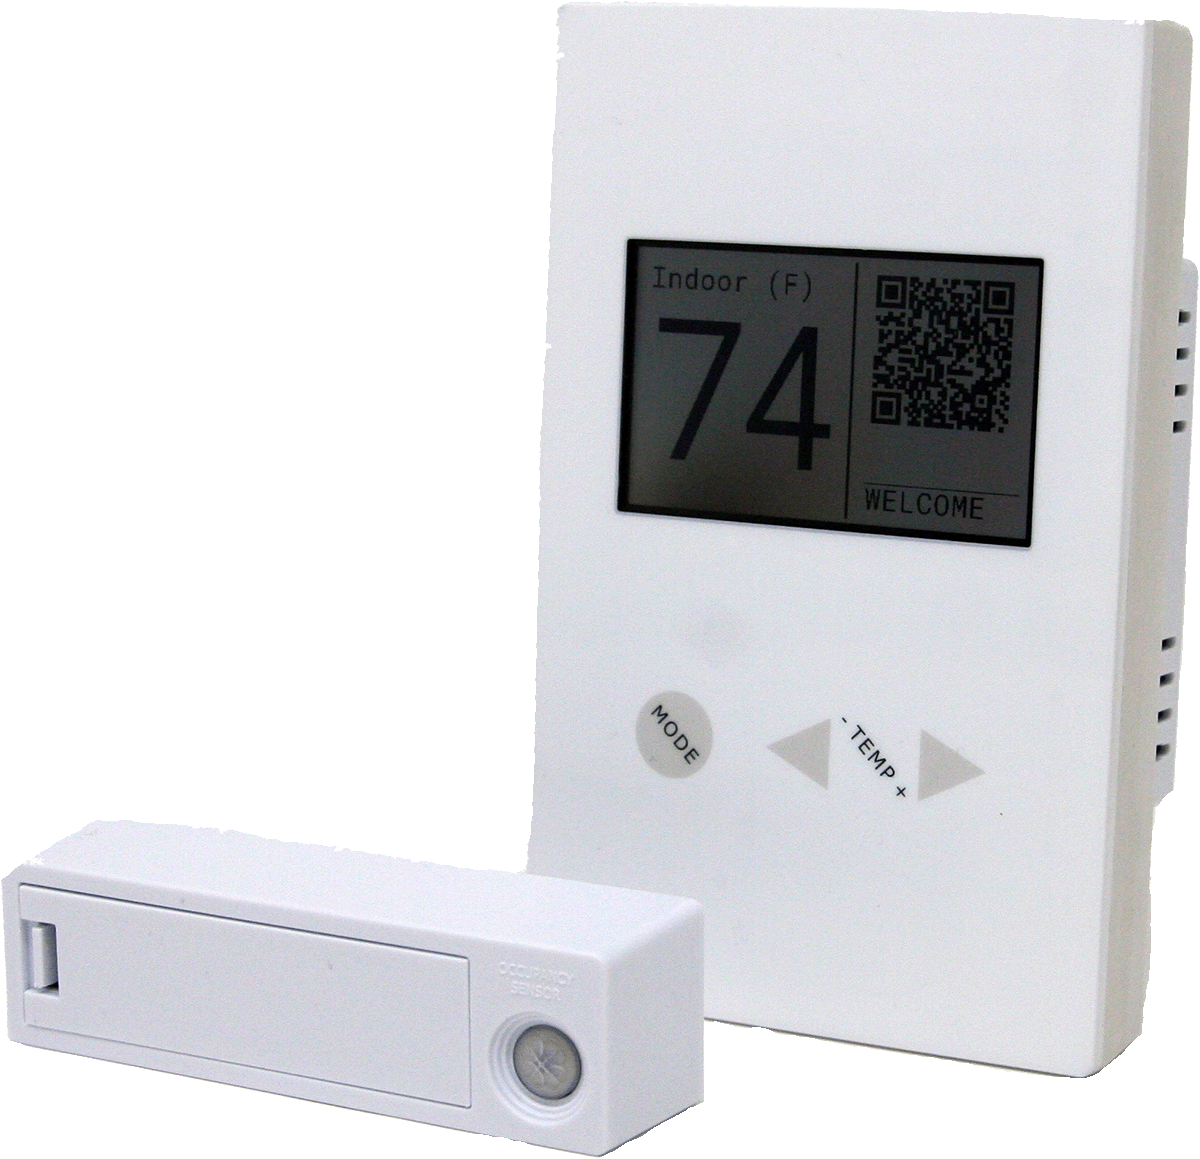 Cyberstat thermostat with occupancy sensor